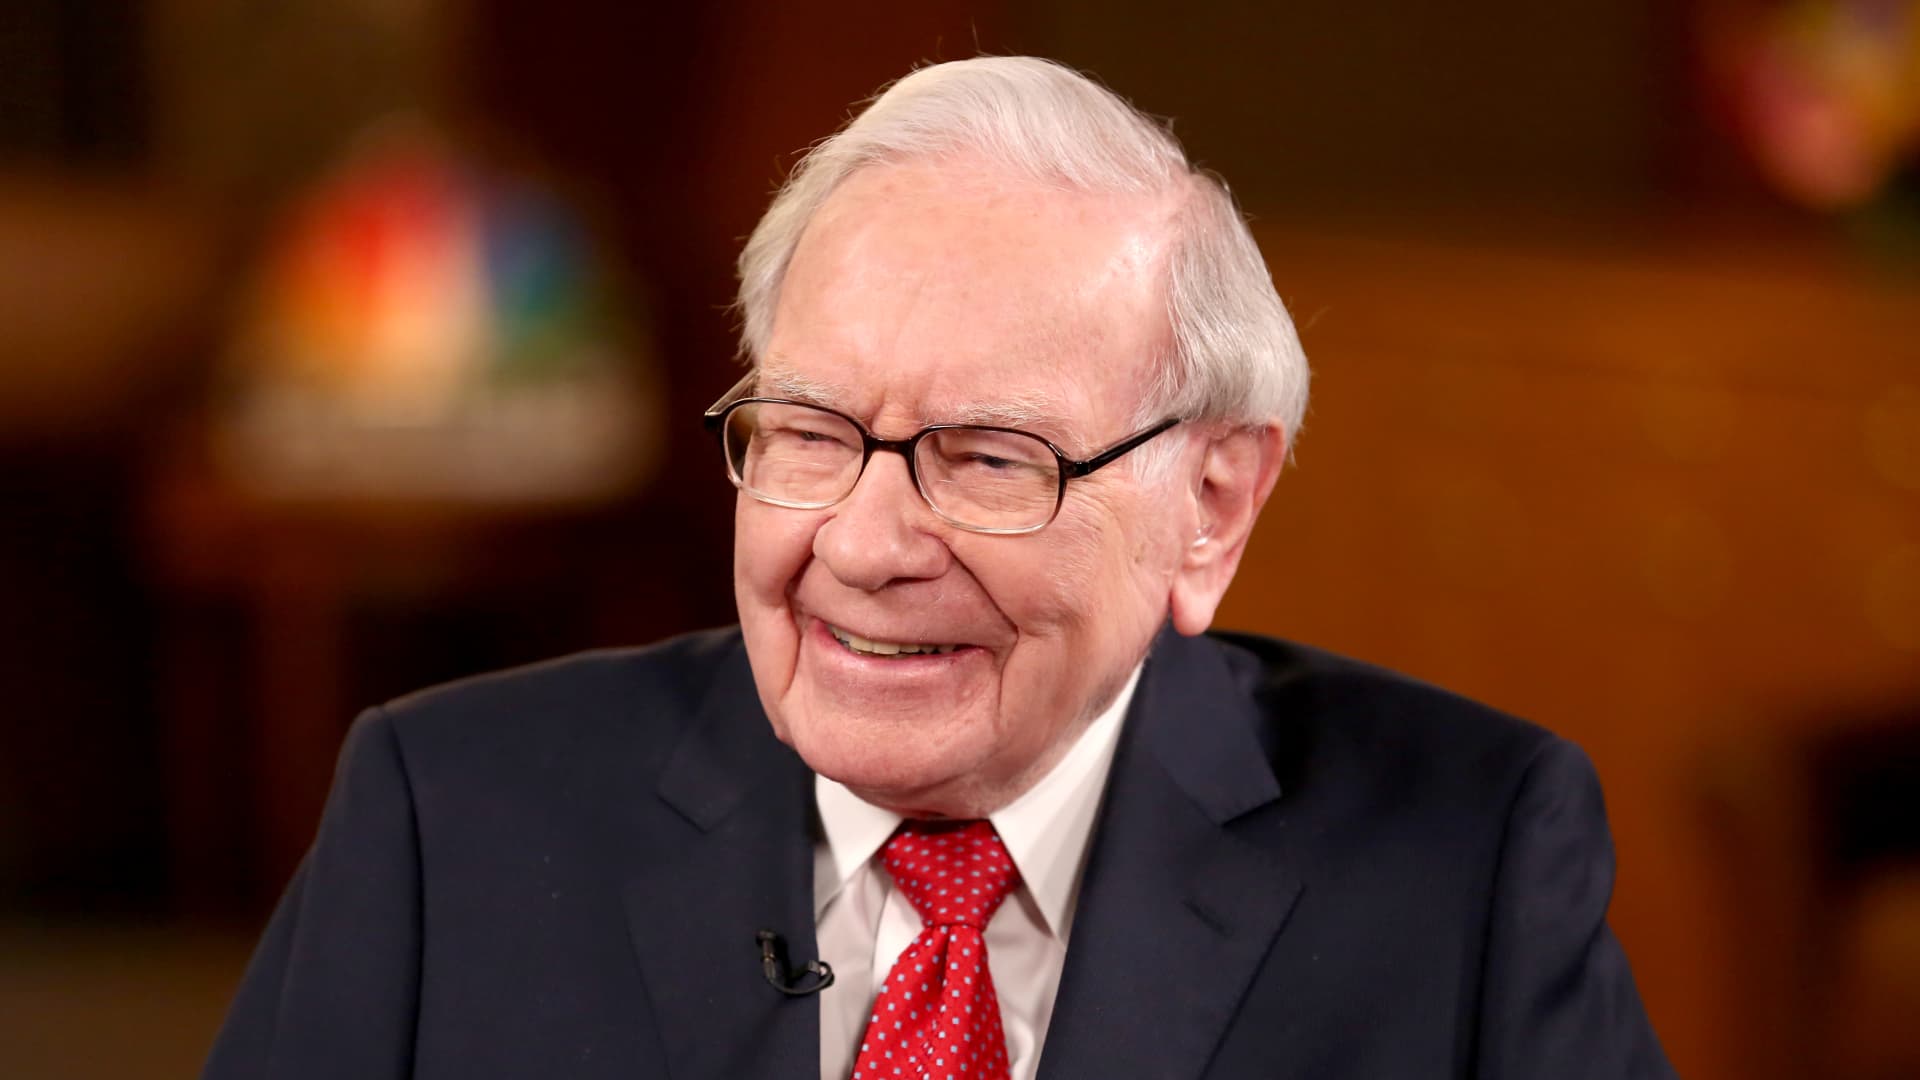 Berkshire Hathaway is one of the most overbought stocks on Wall Street. Here are the others